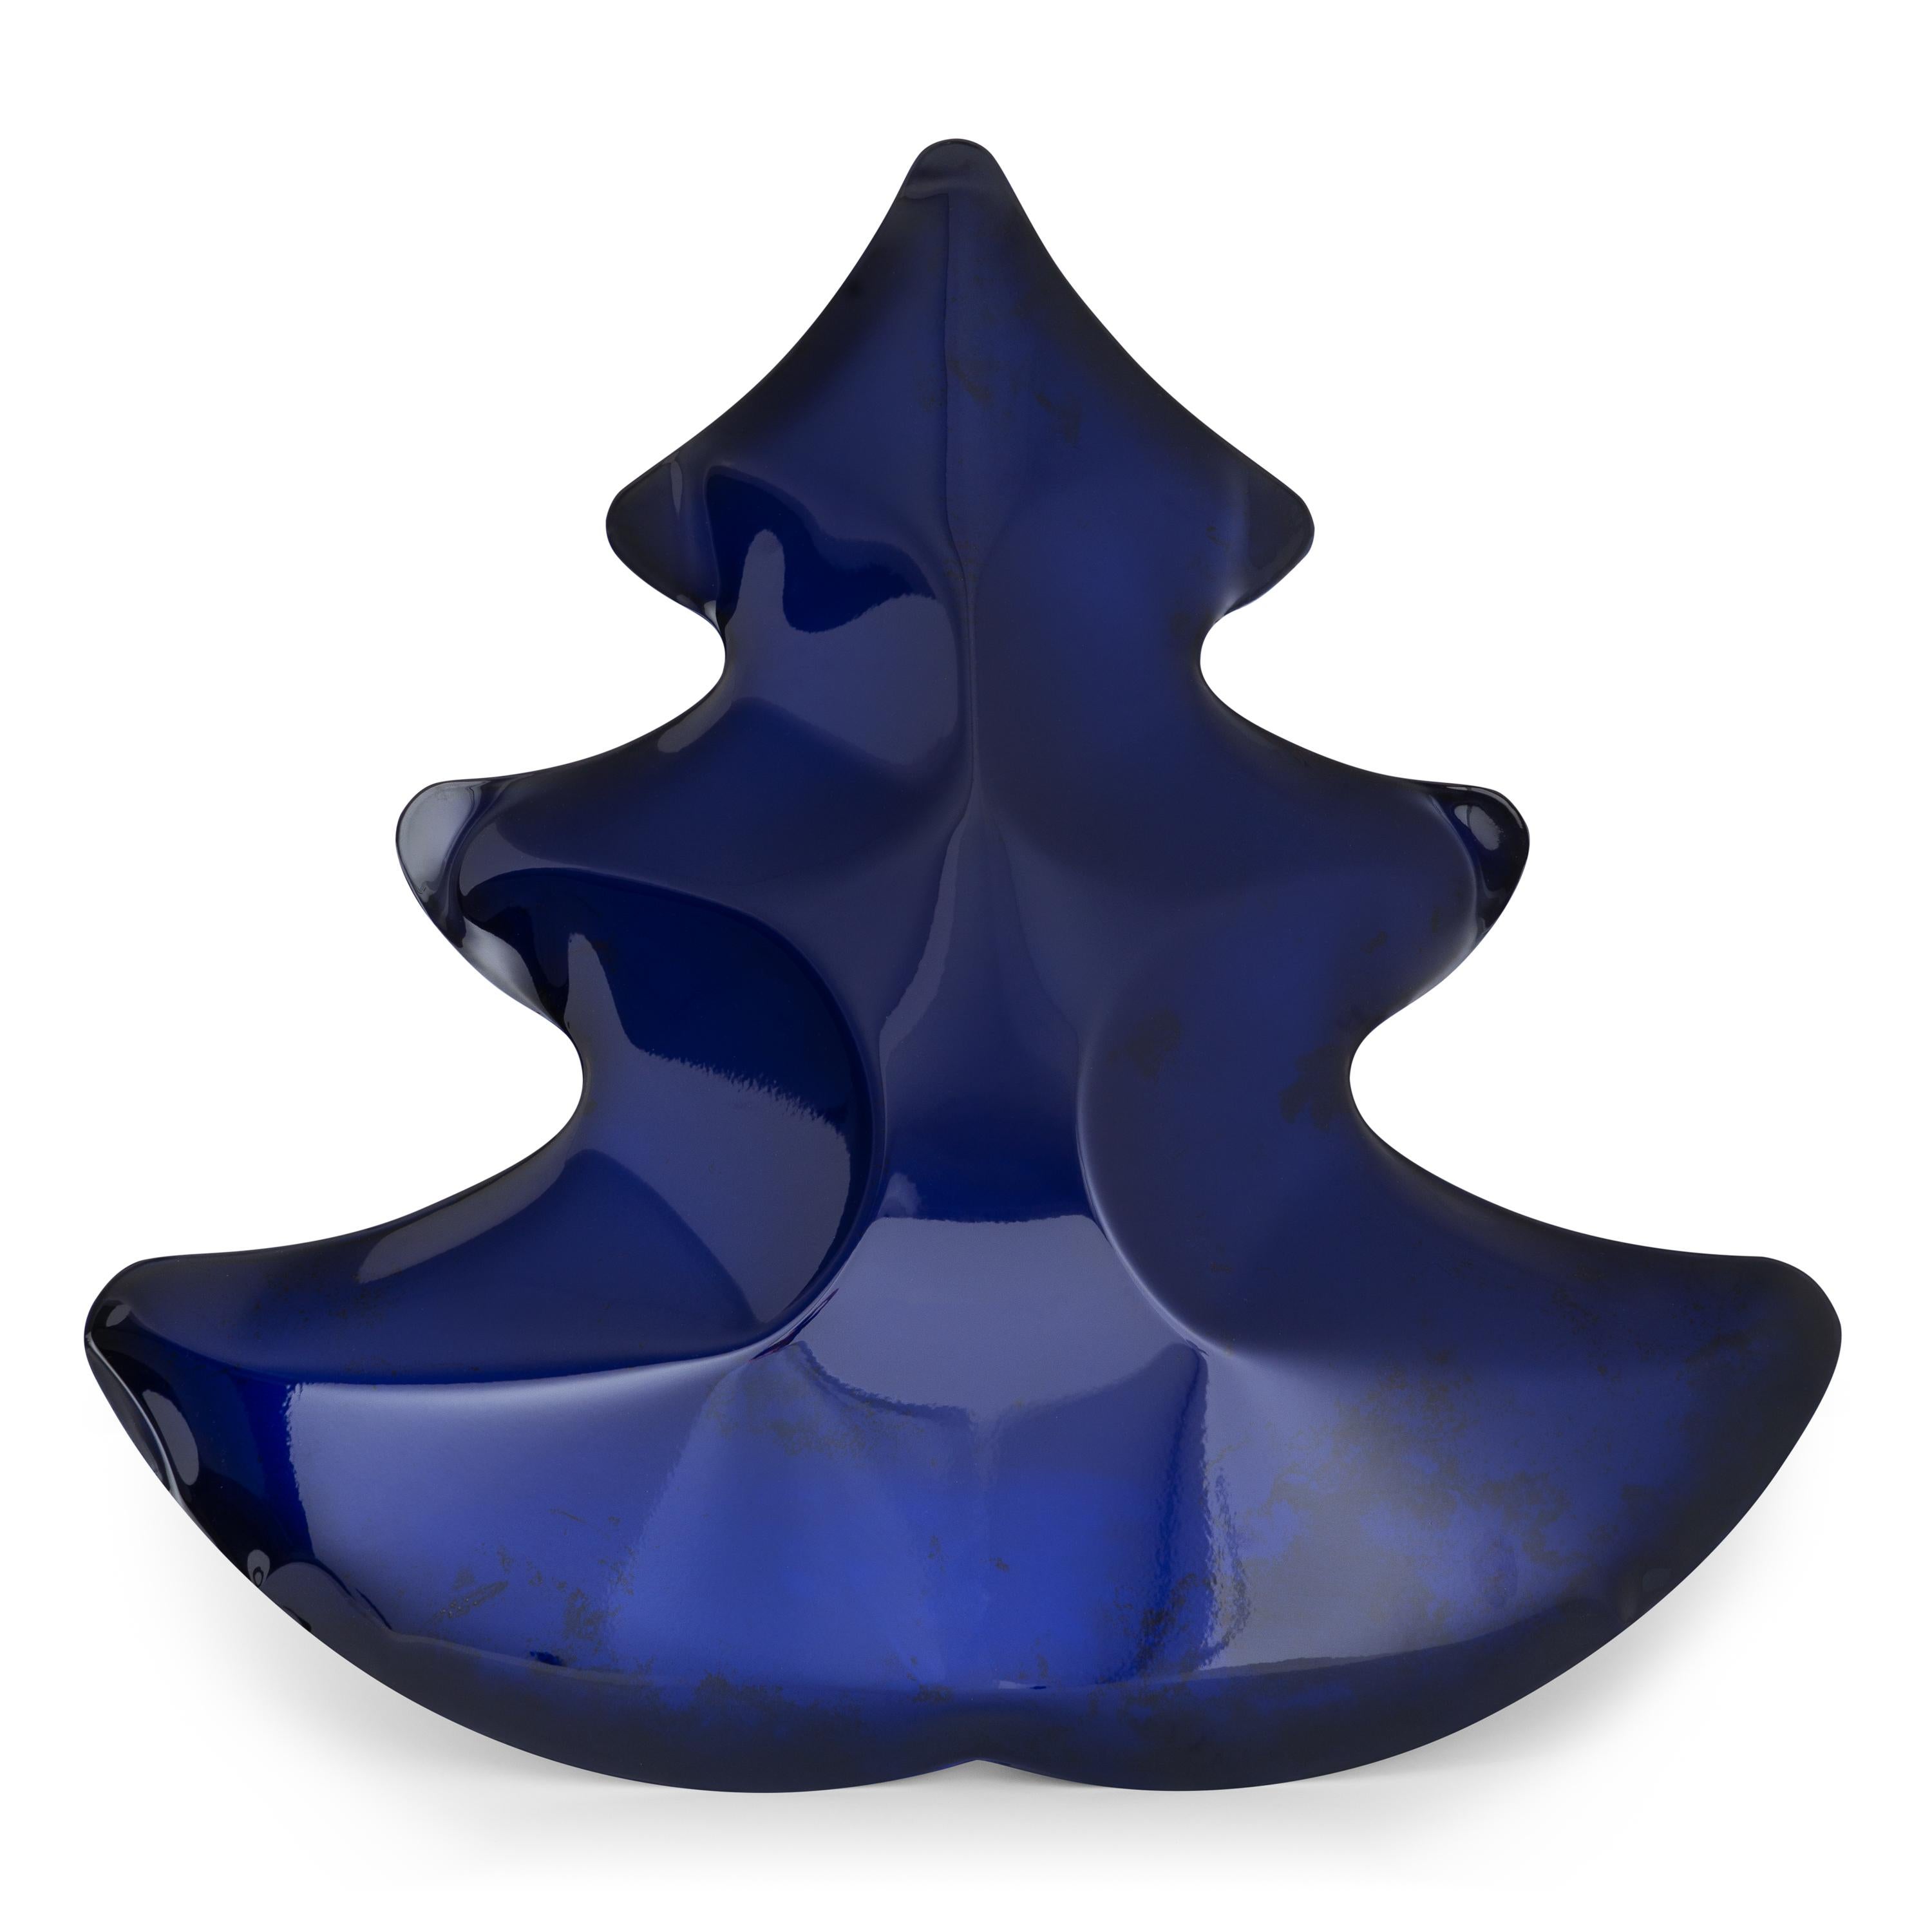 Blue large christmas tree by Zieta
Dimensions: H 70 x W 70 x D 15 cm.
Materials: Blue carbon steel.

Different sizes (small) and colors available (blue, red, INOX, gold). Please contact us.

Following “less is more” motto, our CHOINKA glows